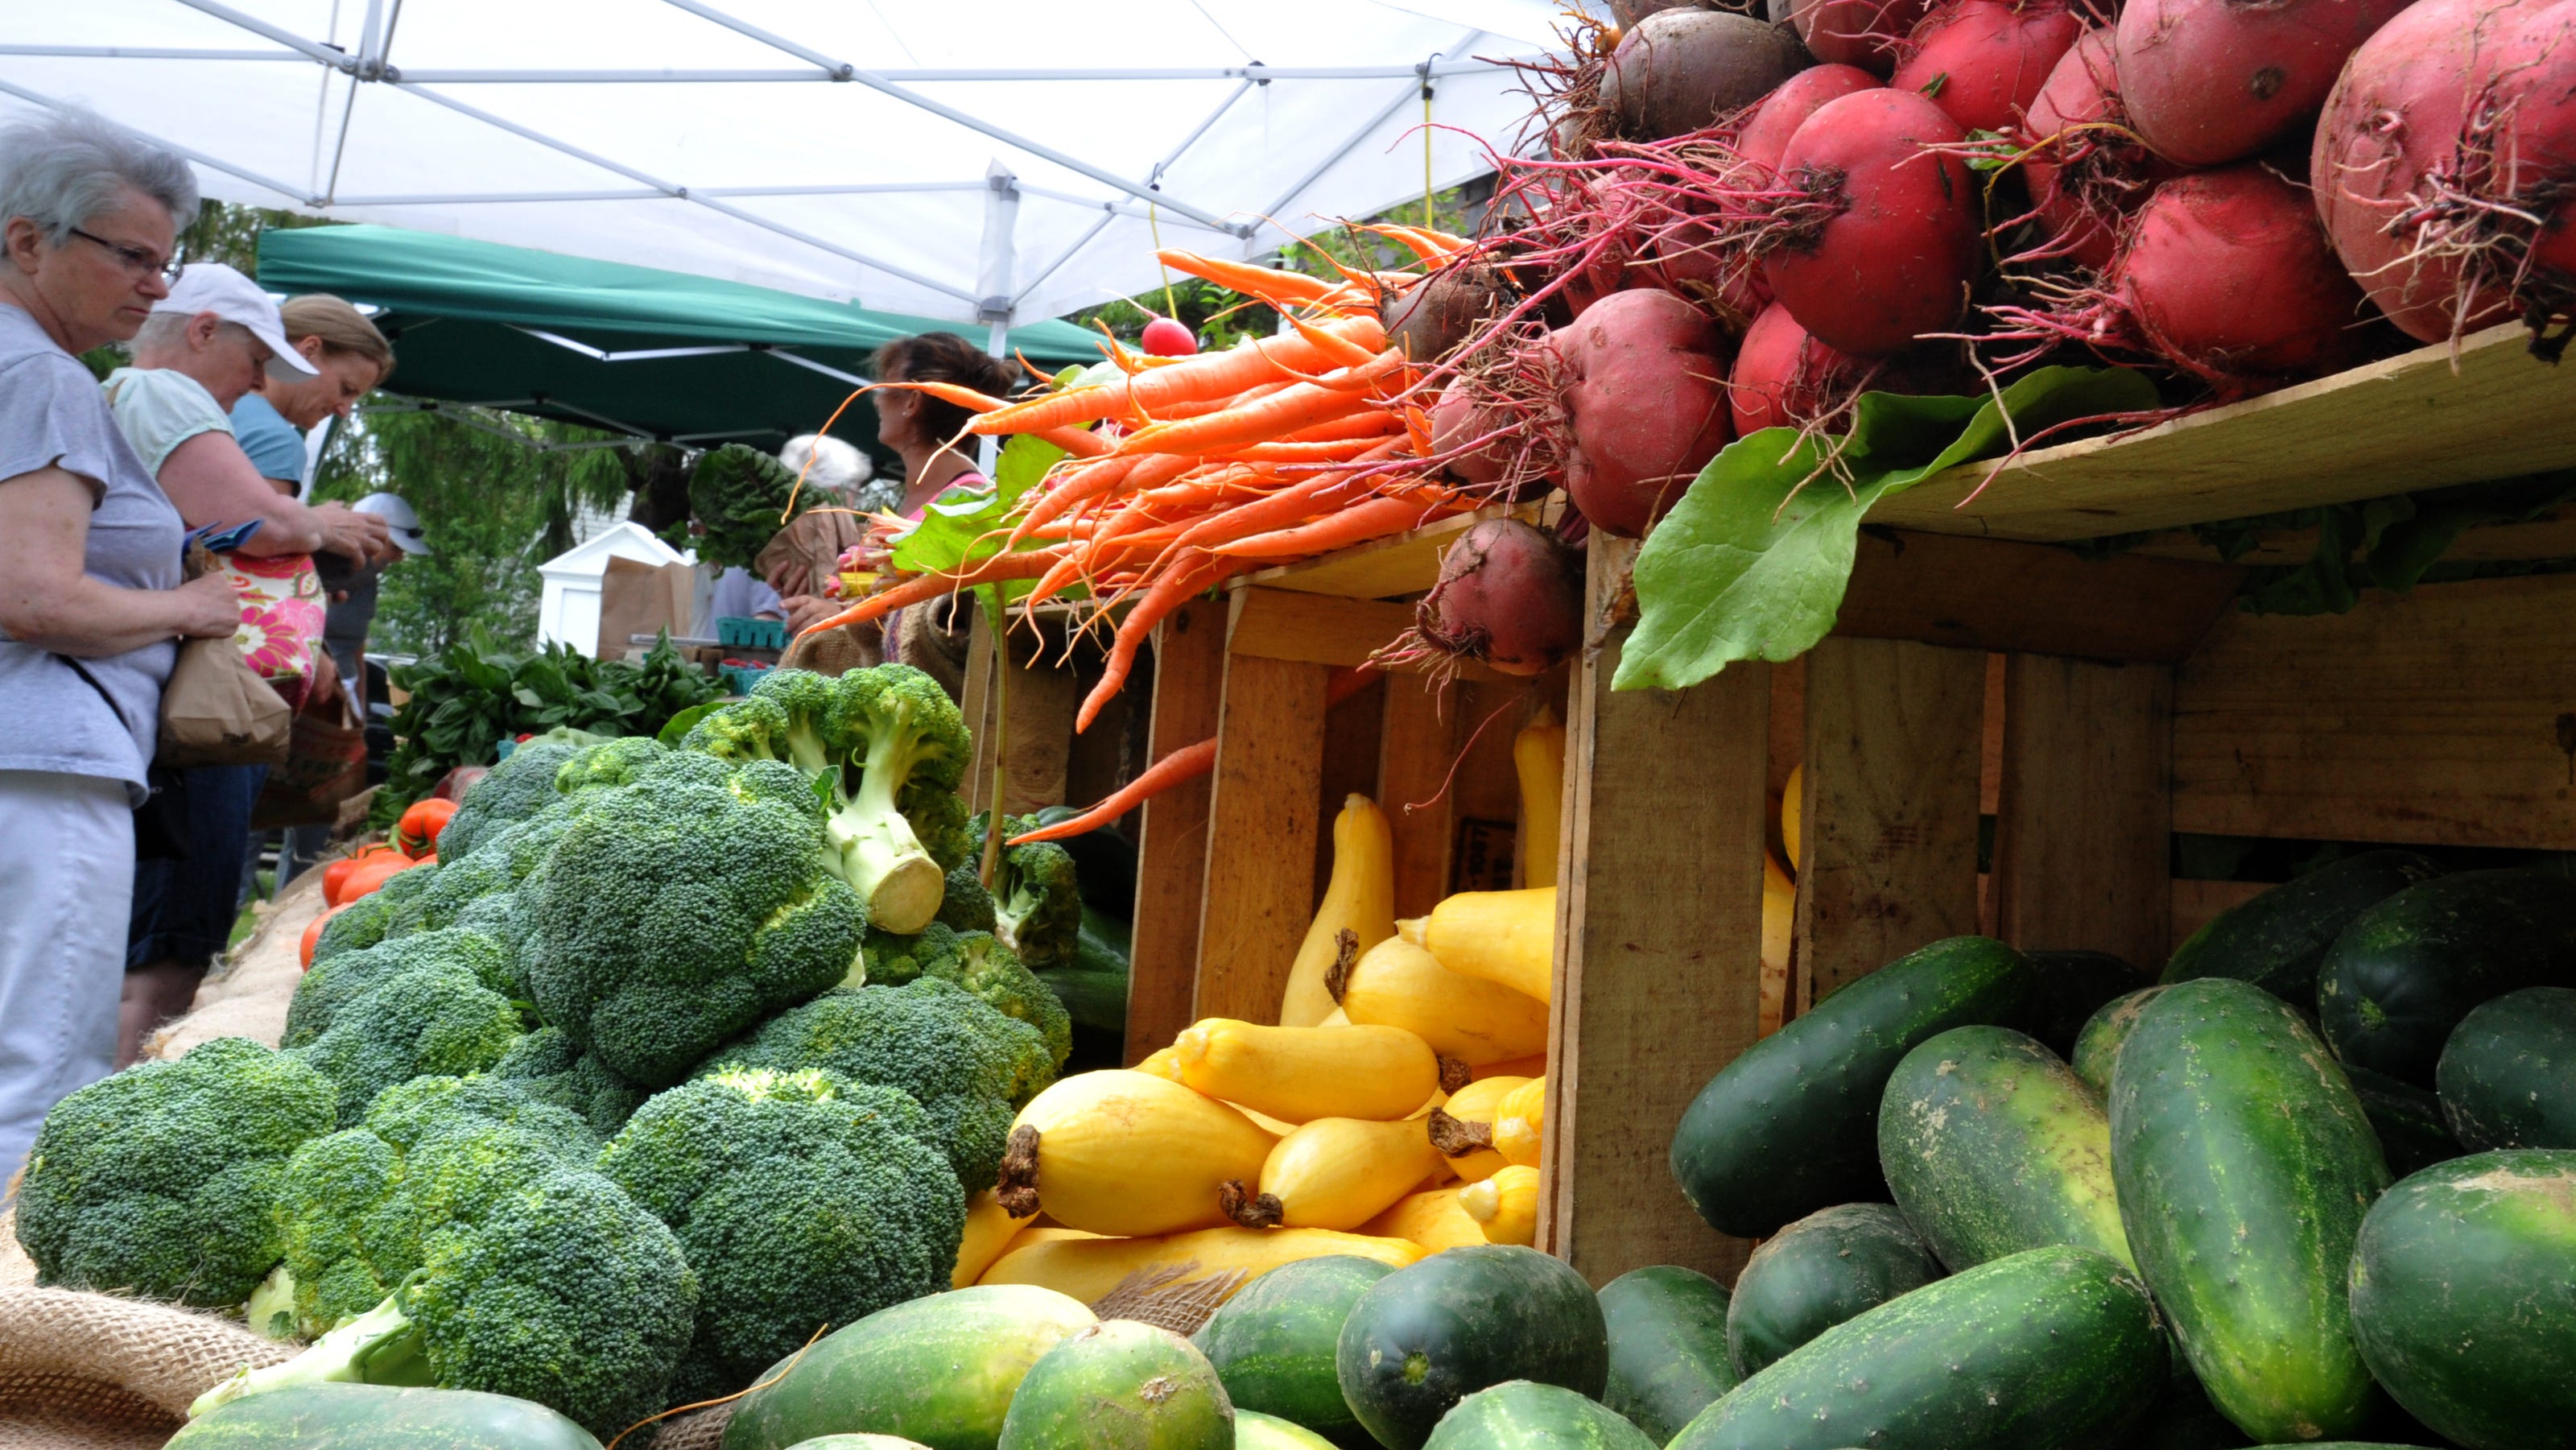 Cape Cod farmers market guide for 2022 Days, Hours, Addresses